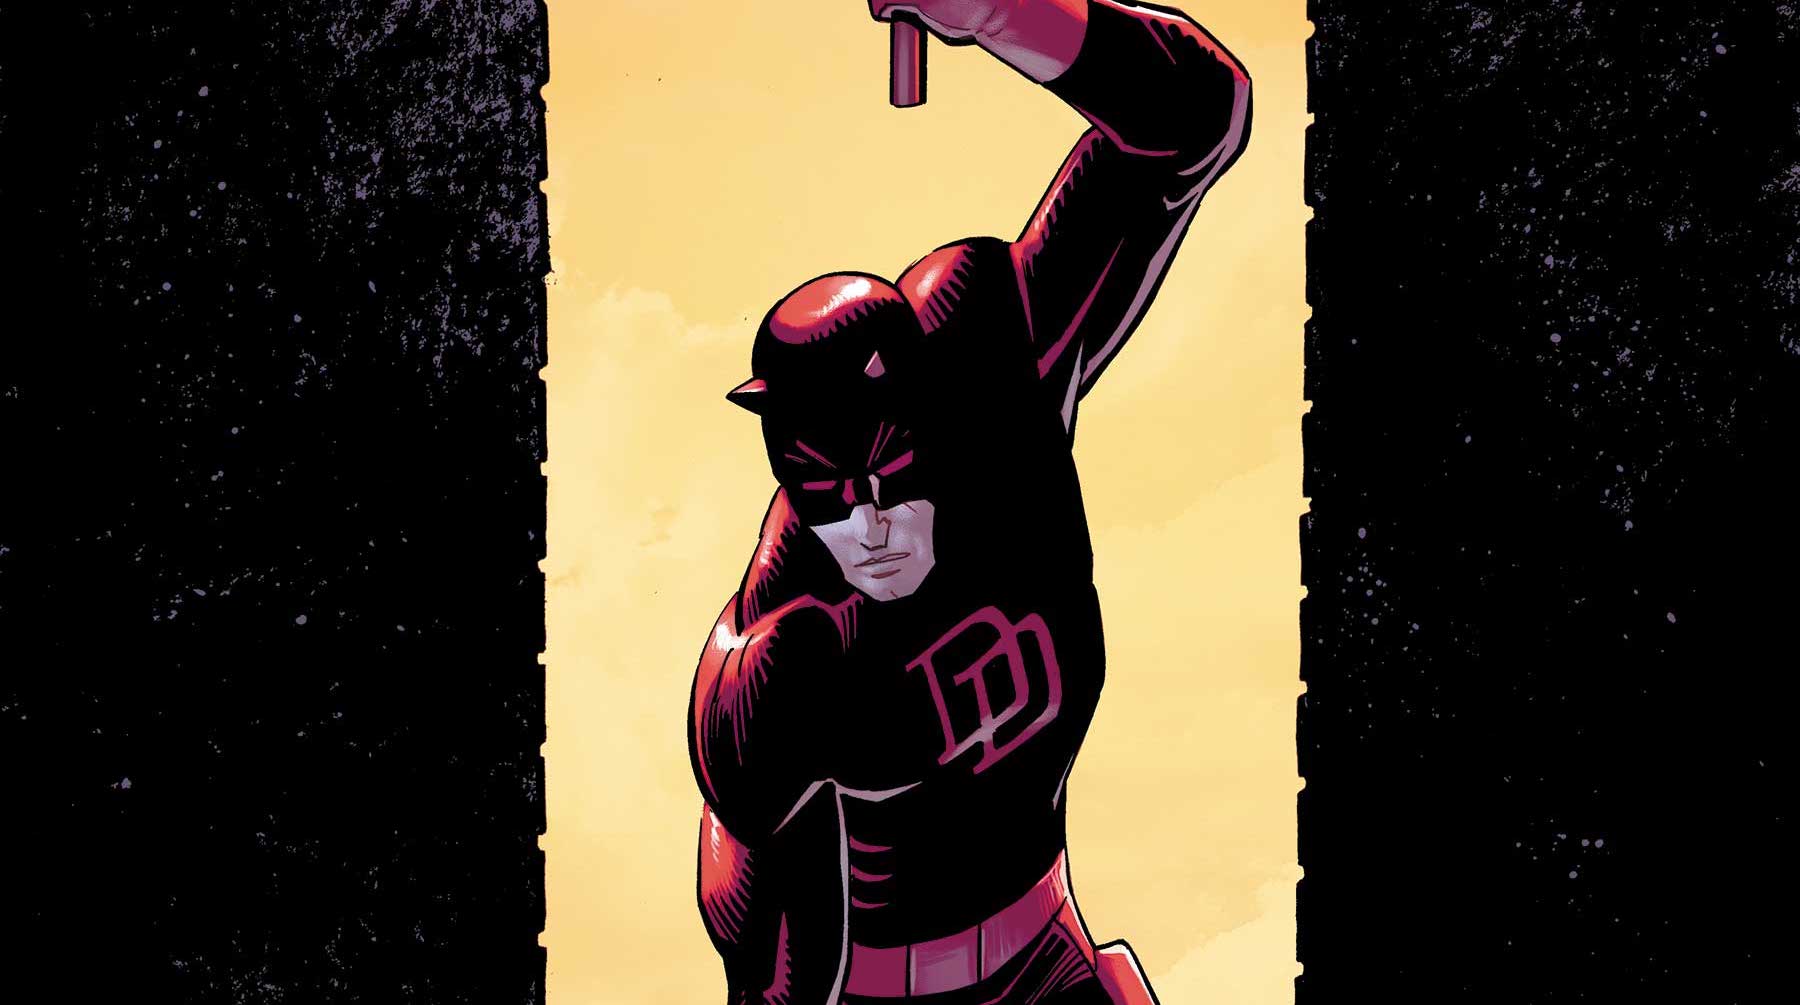 'Daredevil' #2 adds an intriguing paternal element